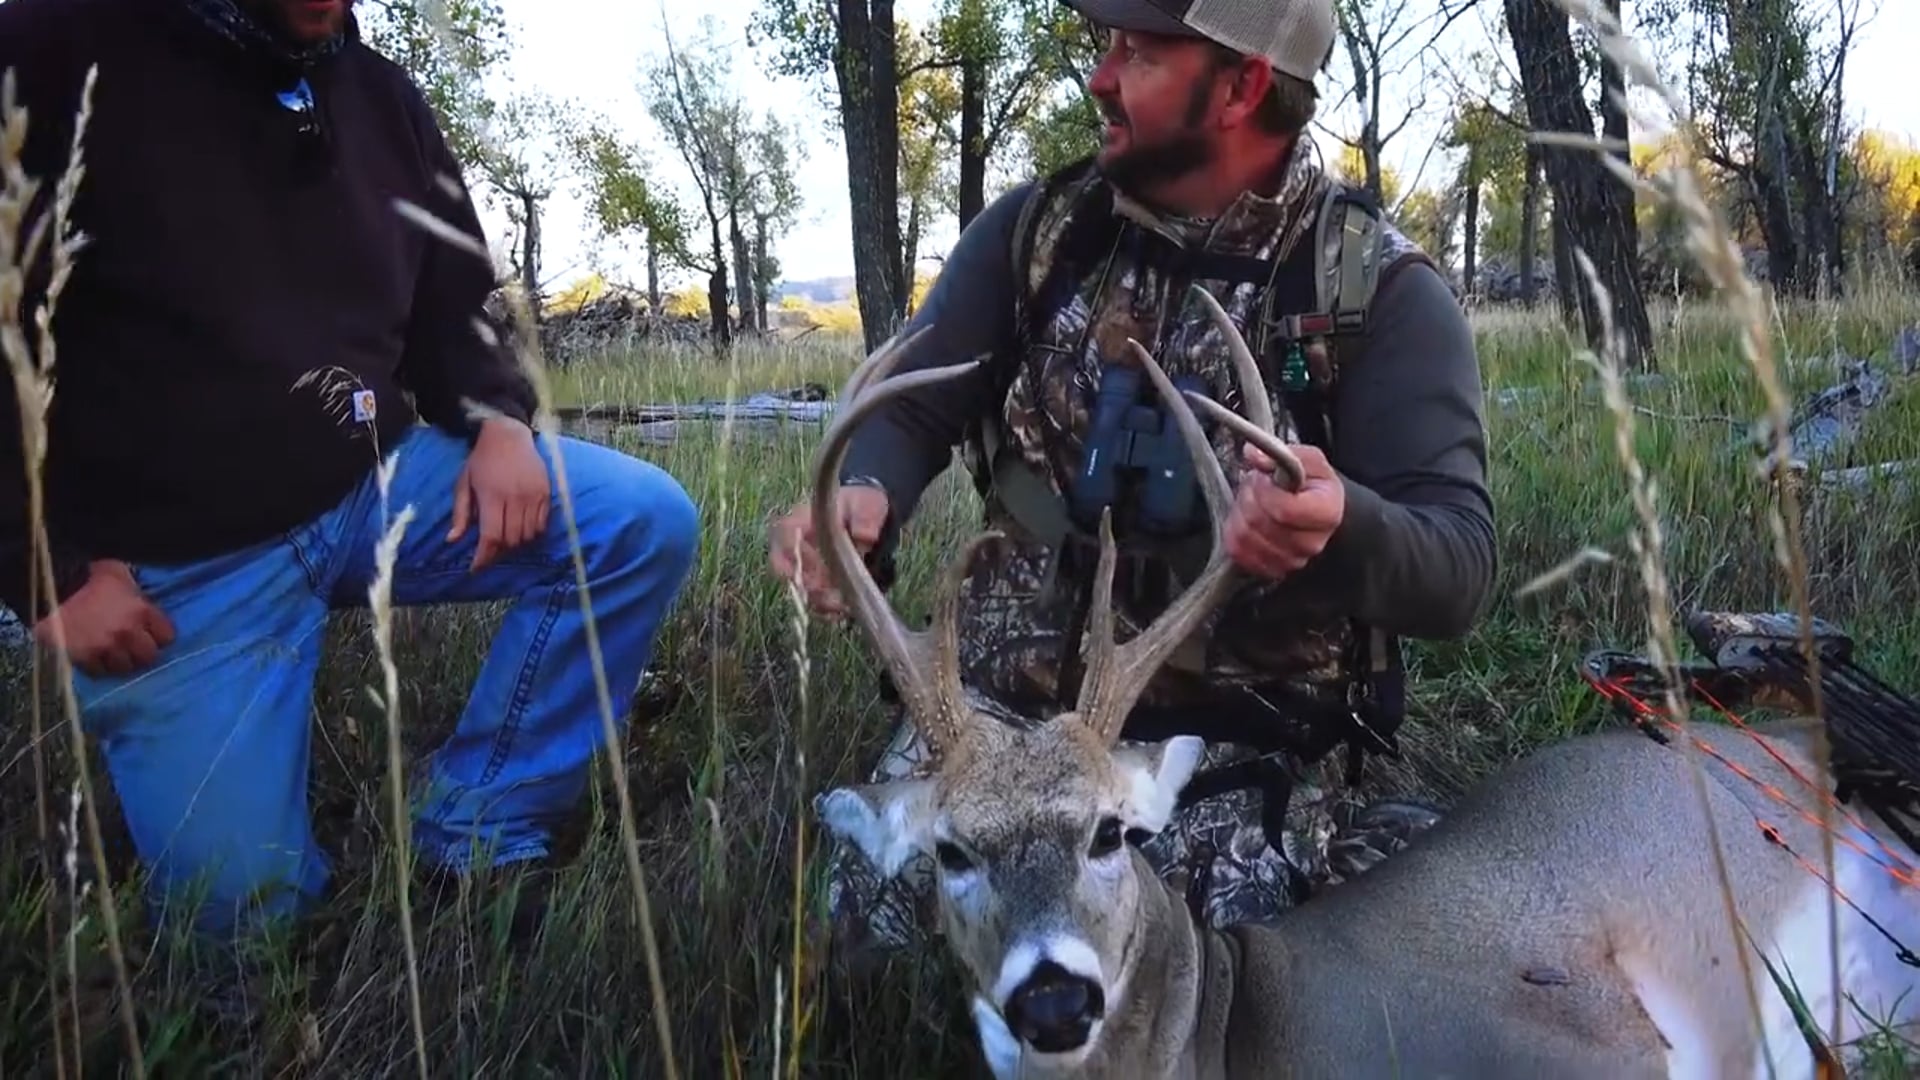 The Virtue - S3 - Hunting with Powder River Outfitters Pt. 2